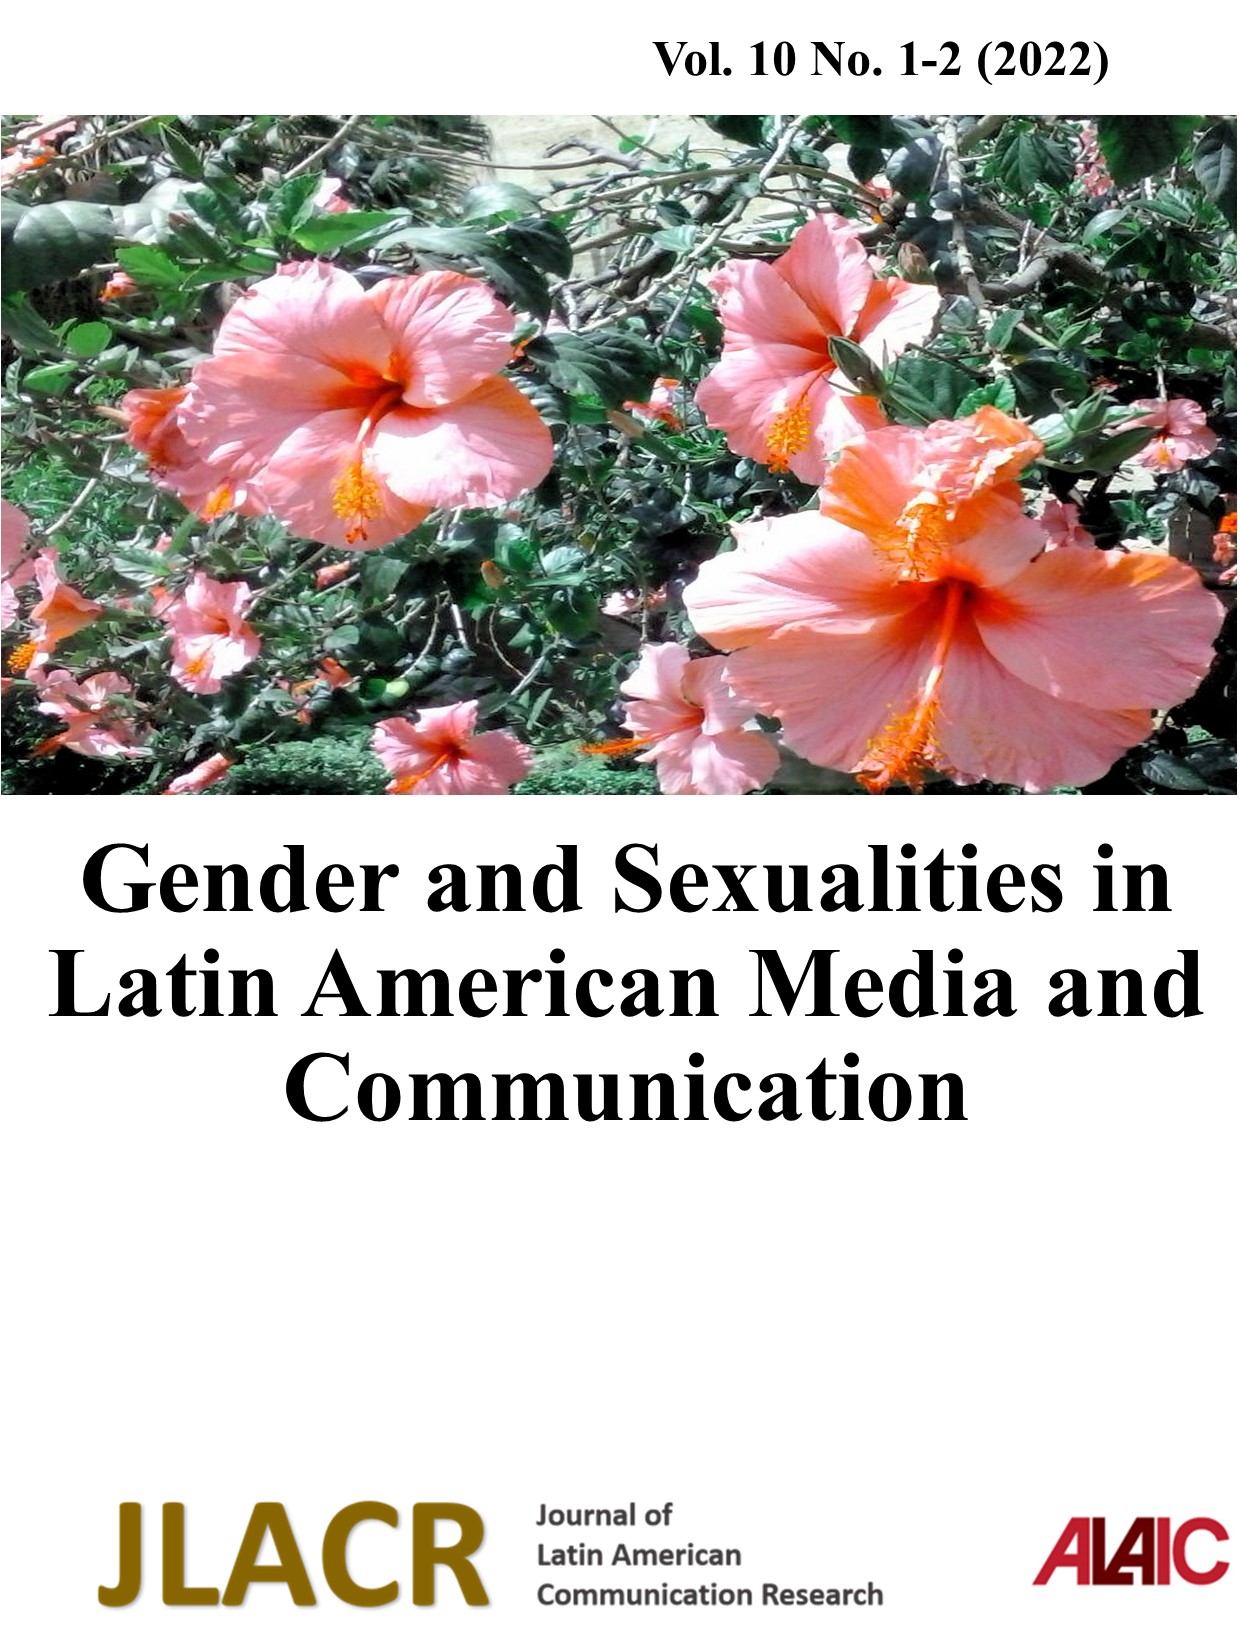 					View Vol. 10 No. 1-2 (2022): Gender and Sexualities in Latin American Media and Communication
				